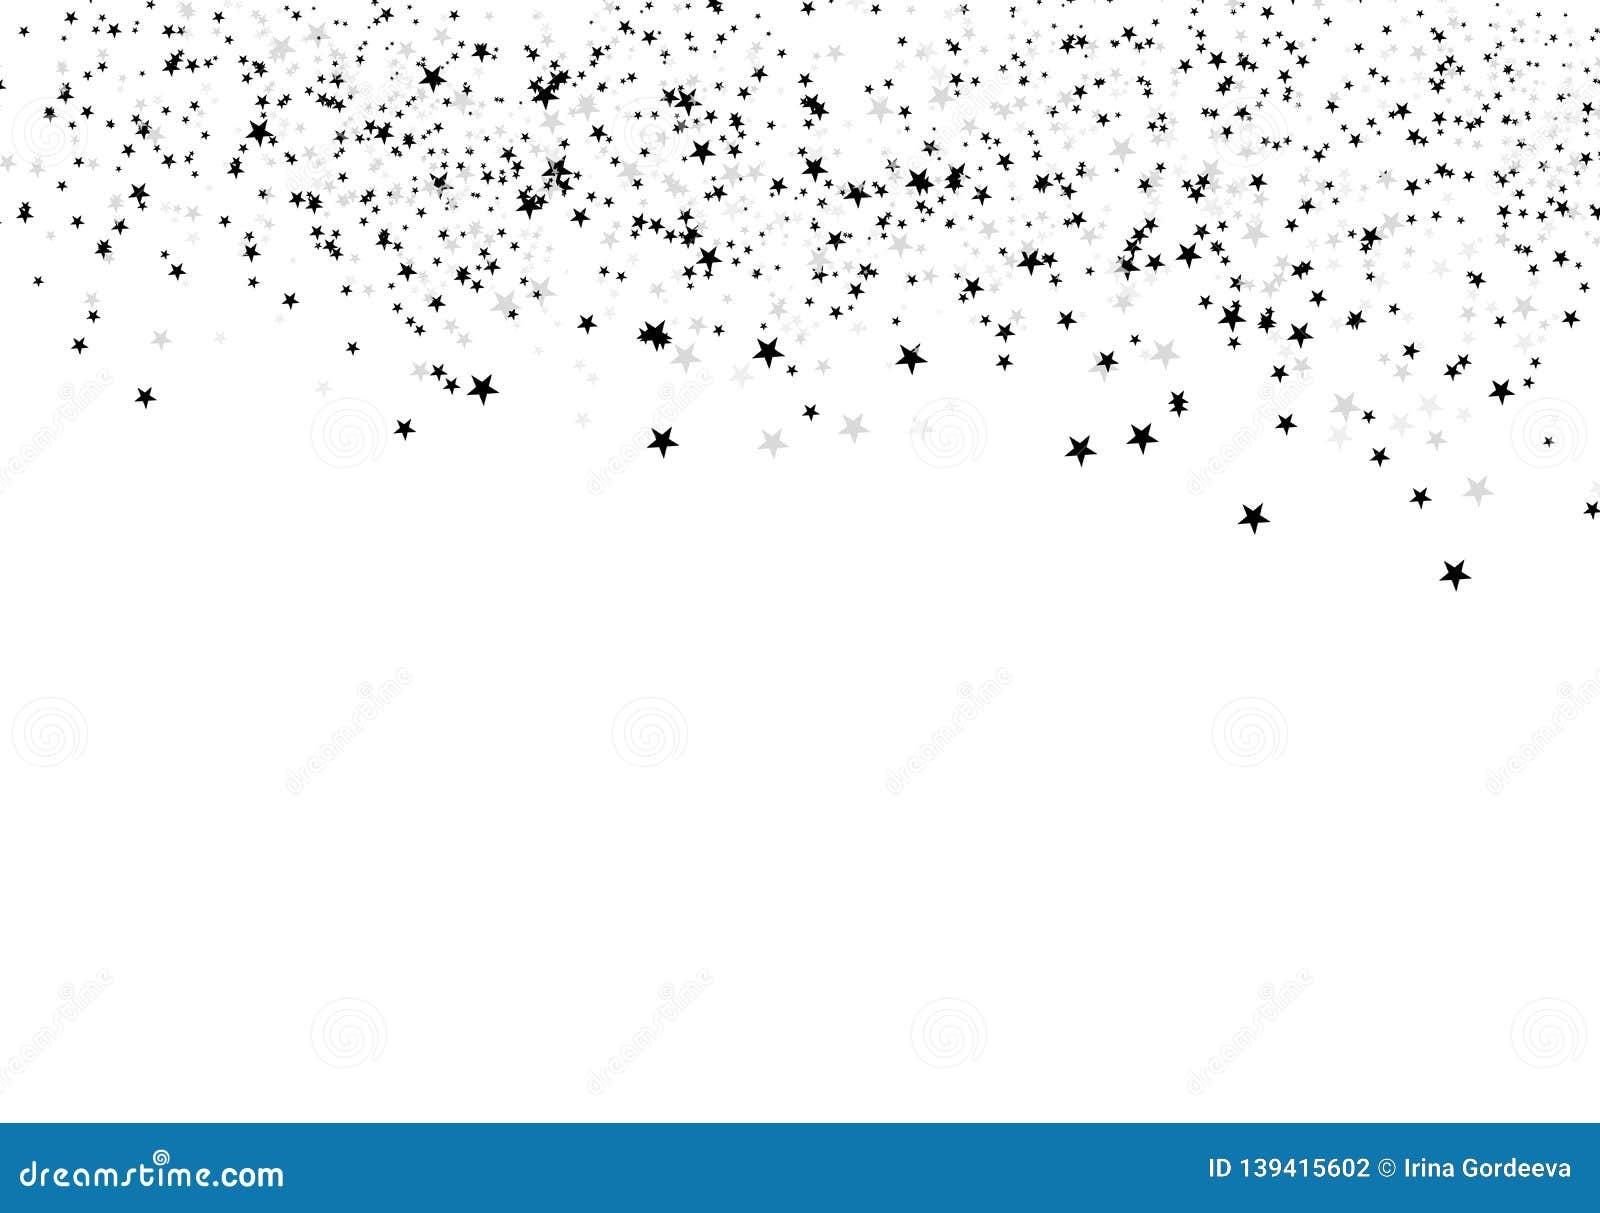 Stars on a White Background Stock Vector - Illustration of lucky,  astronomy: 139415602